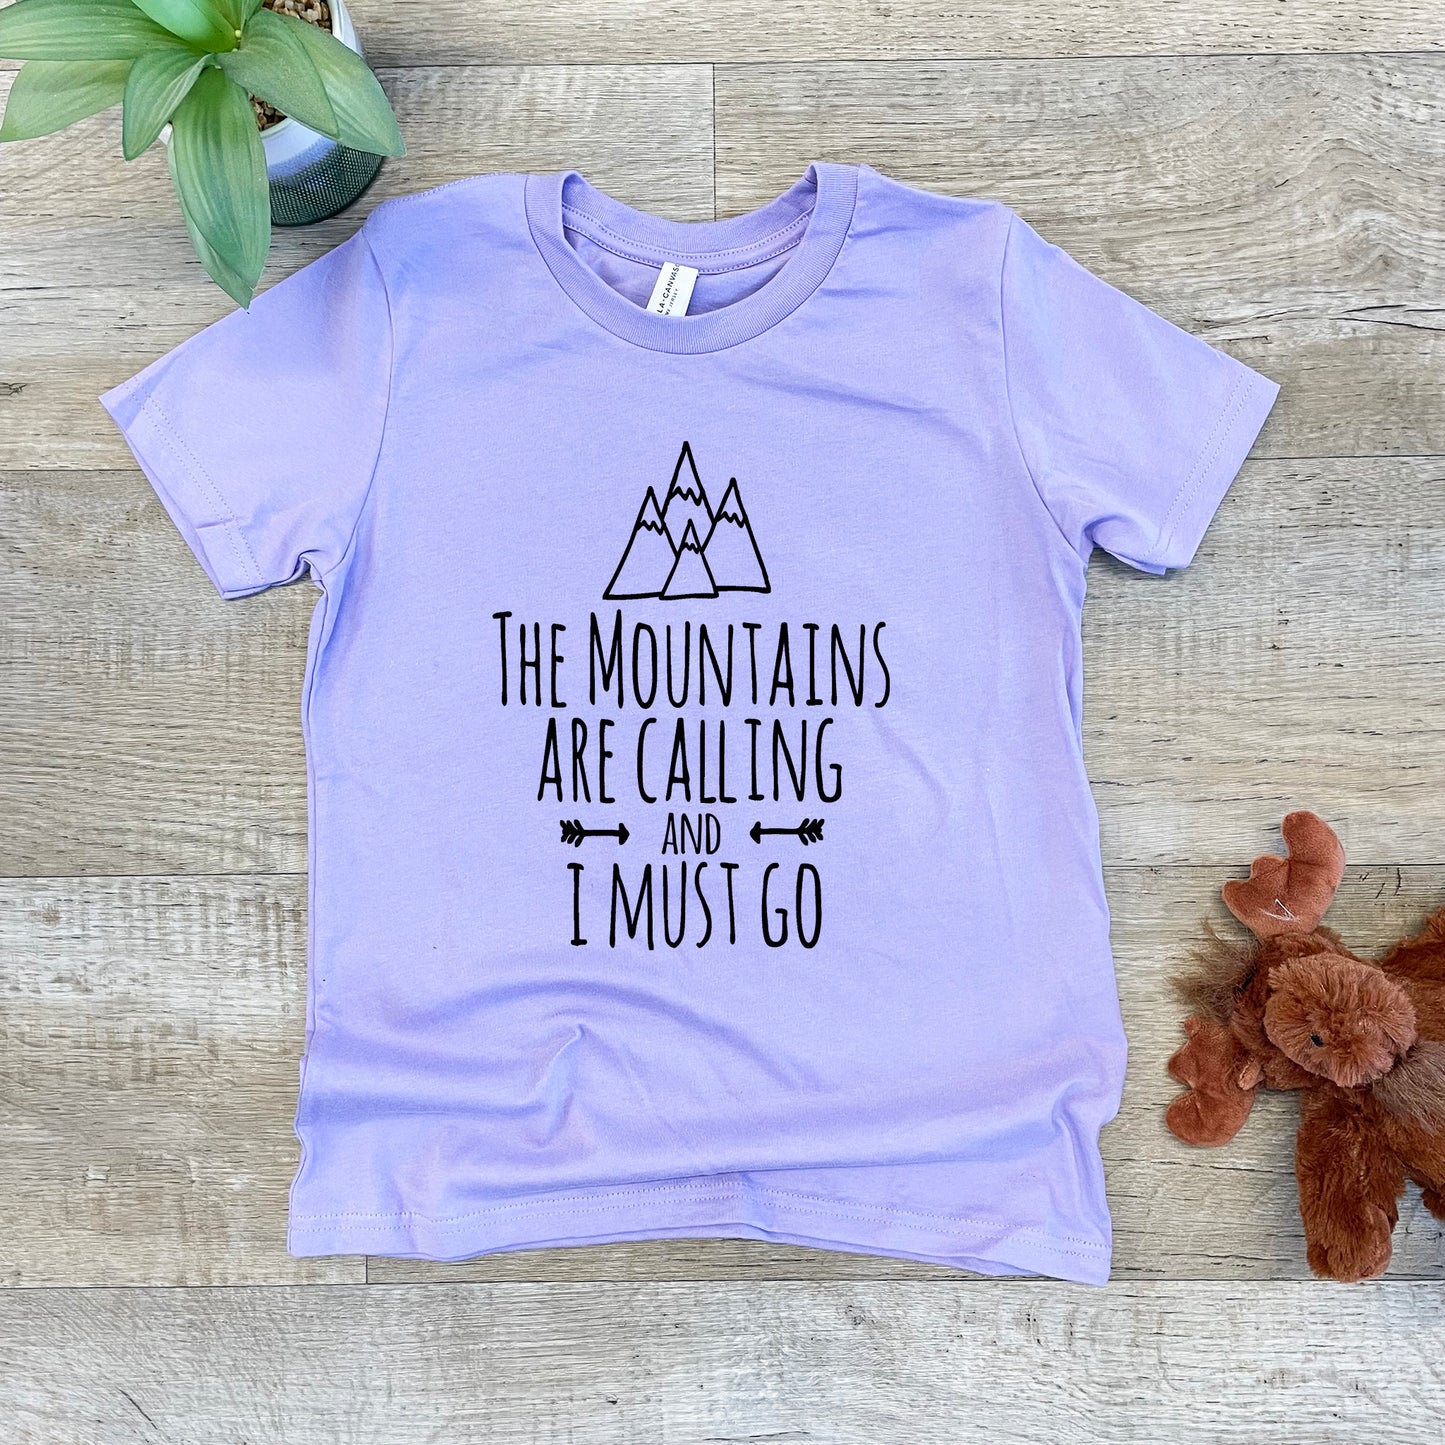 The Mountains Are Calling And I Must Go - Kid's Tee - Columbia Blue or Lavender